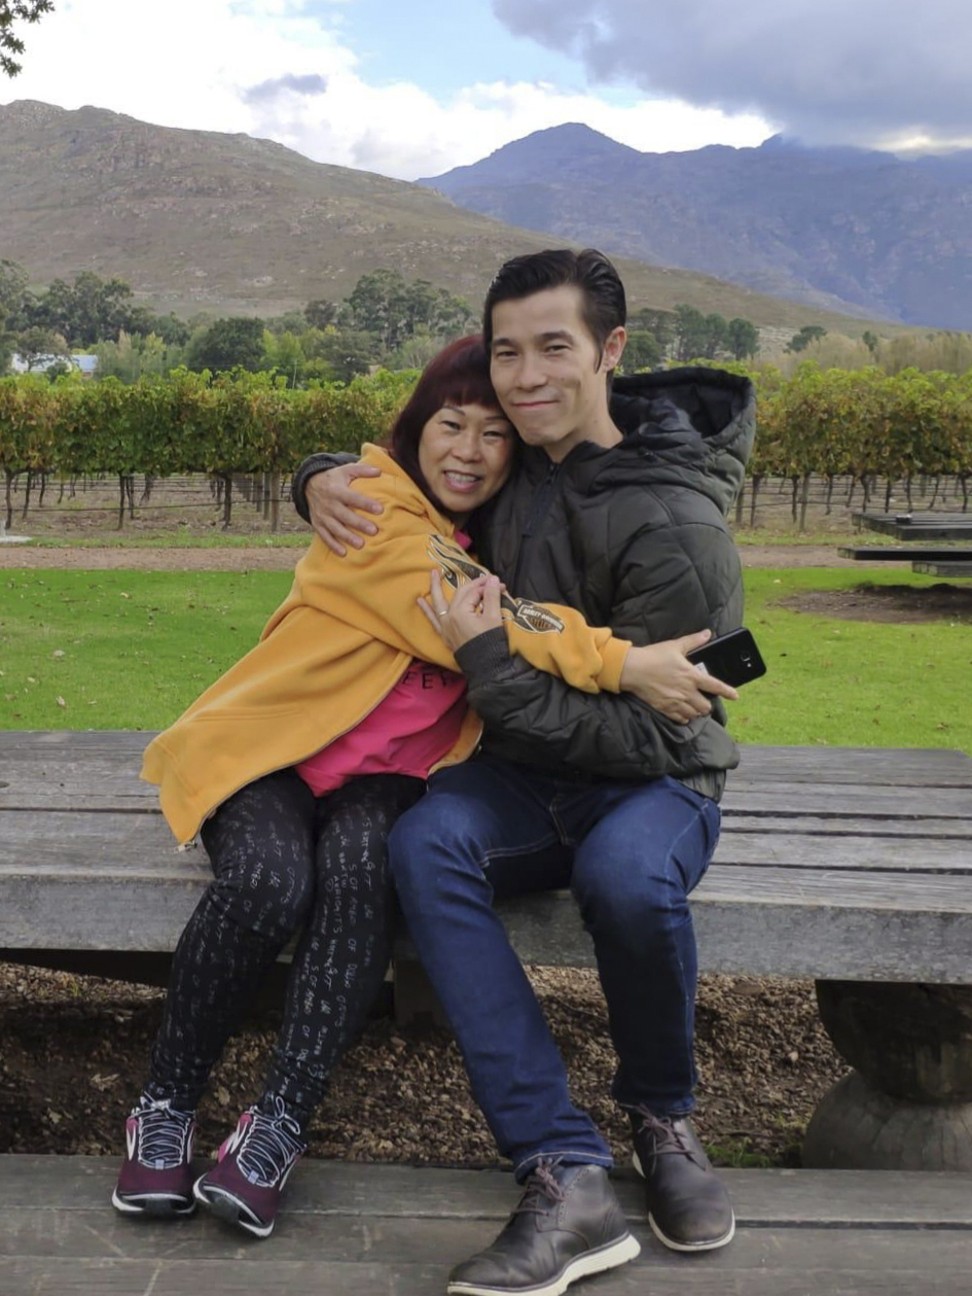 Jason Tobin and his mother Penny Wai in Franschhoek, South Africa.